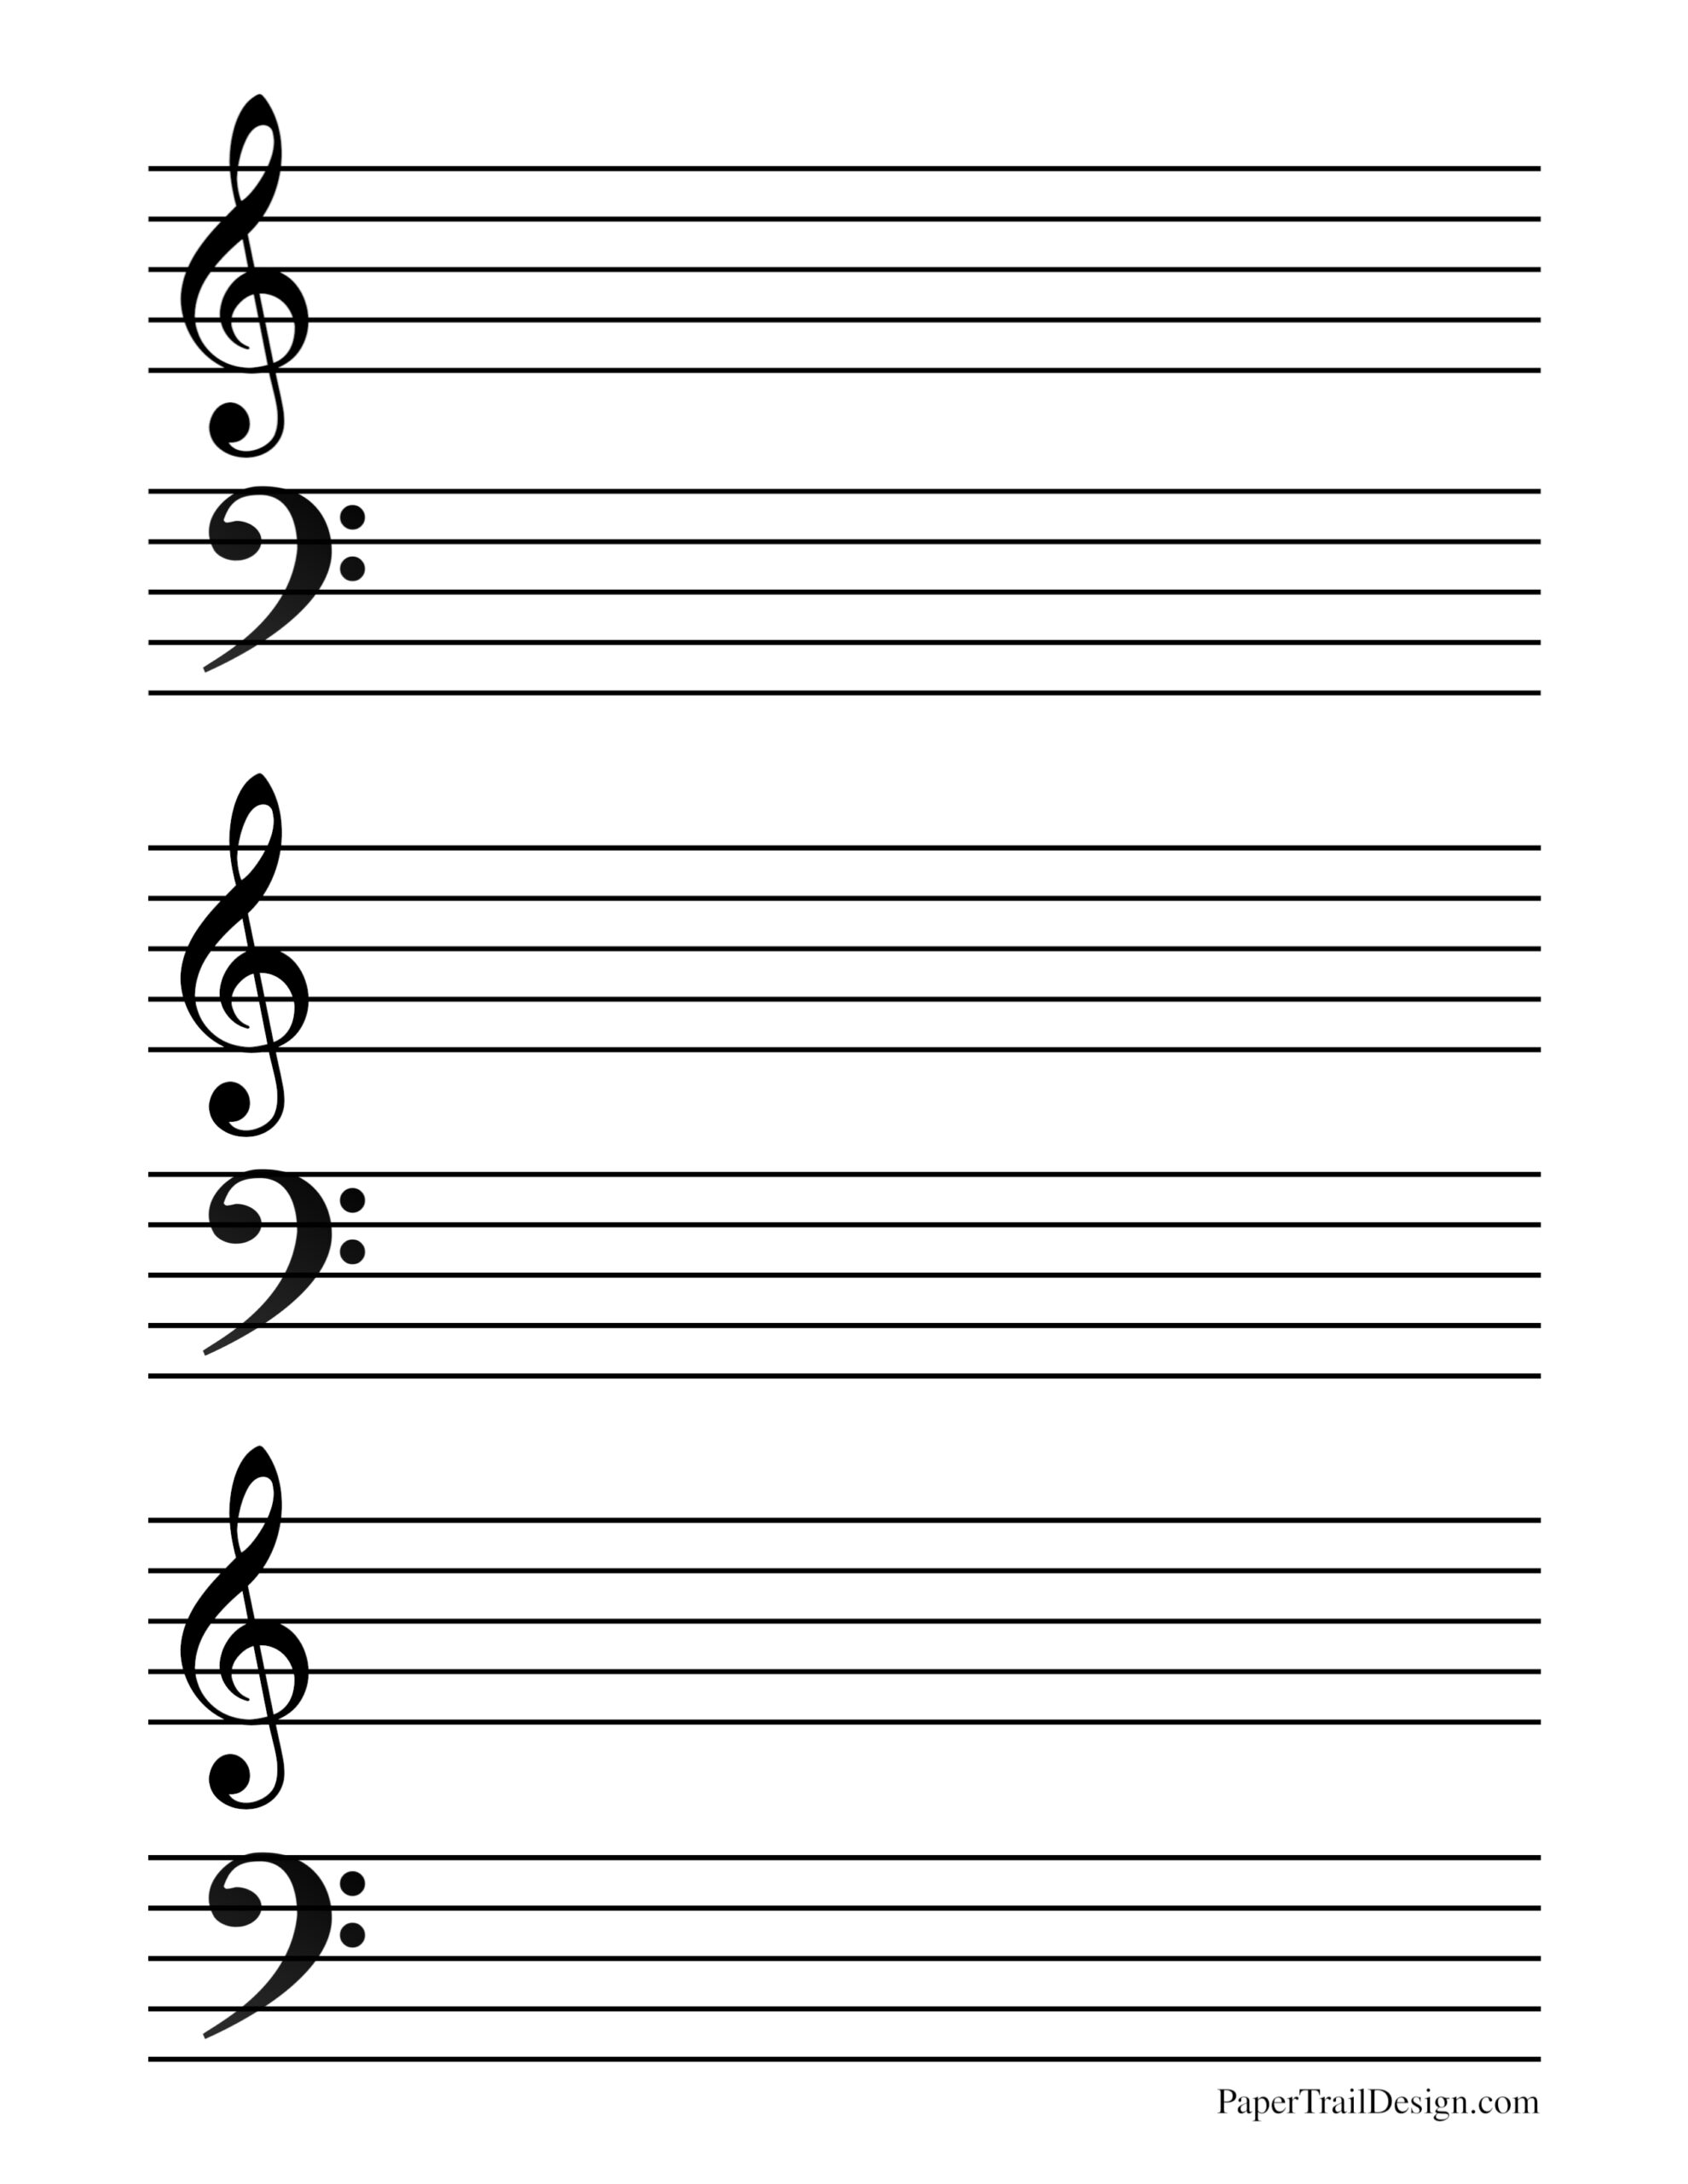 sheets with bar lines to compose music